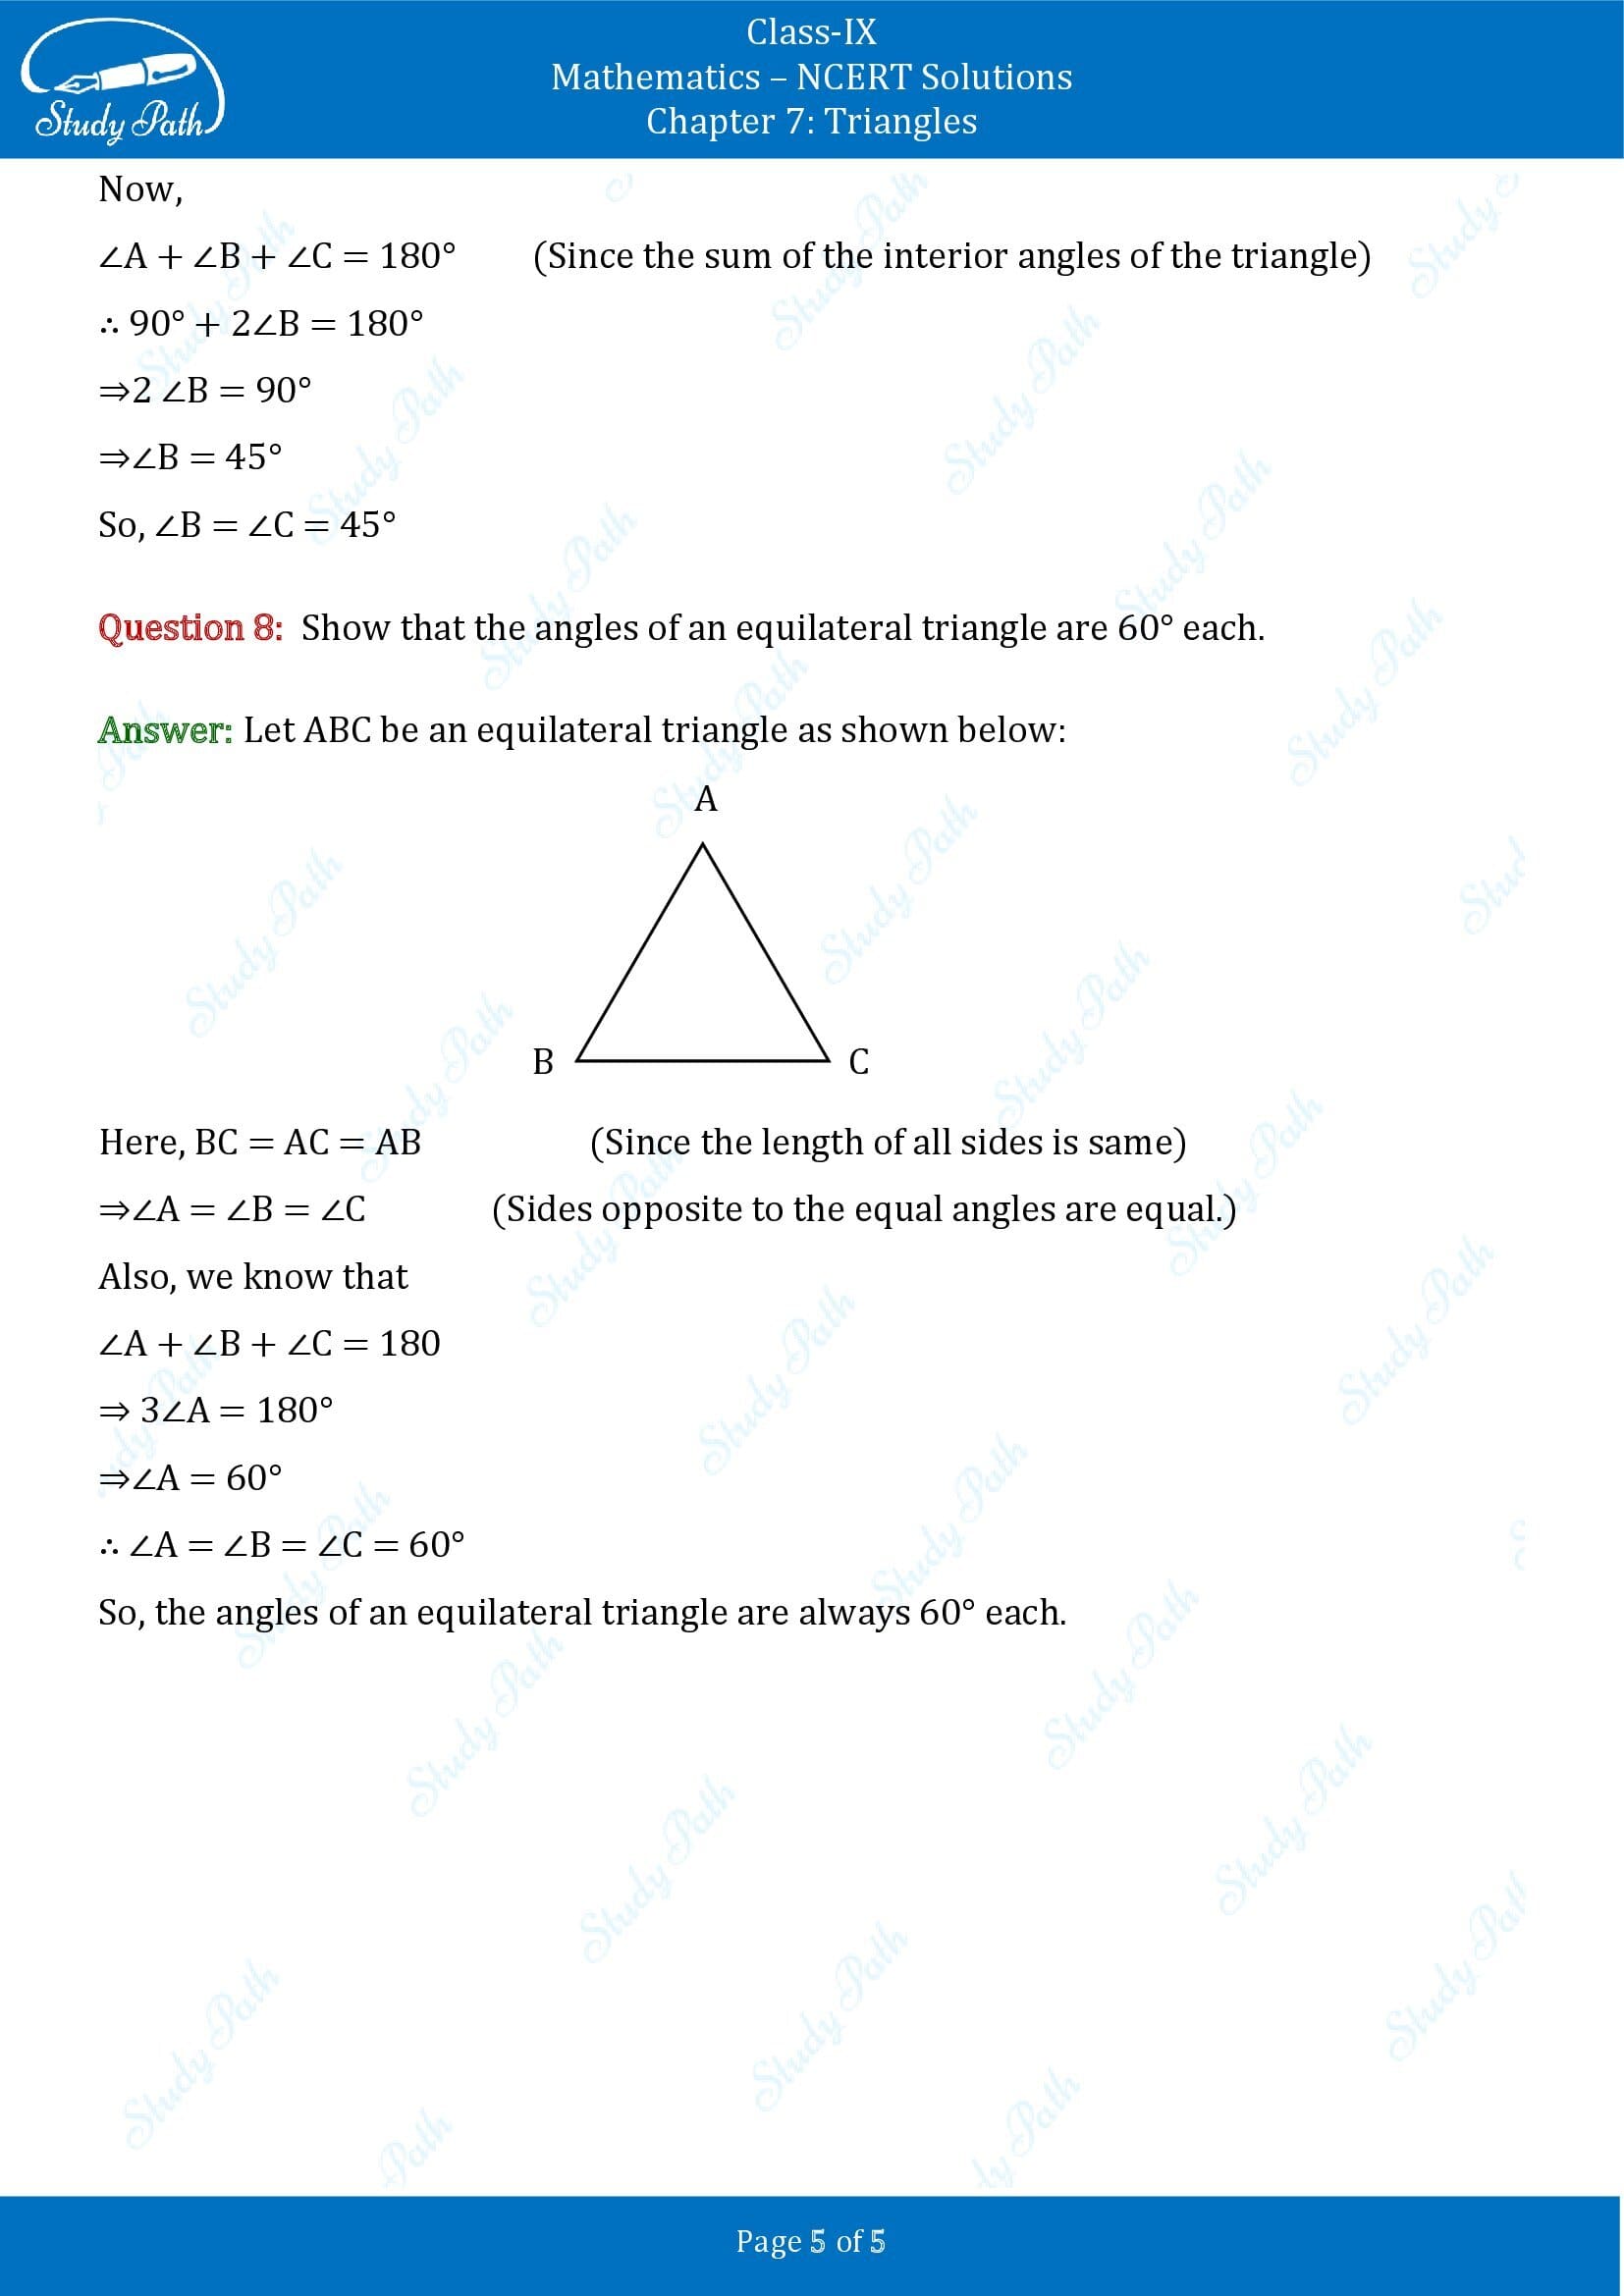 NCERT Solutions for Class 9 Maths Chapter 7 Triangles Exercise 7.2 00005